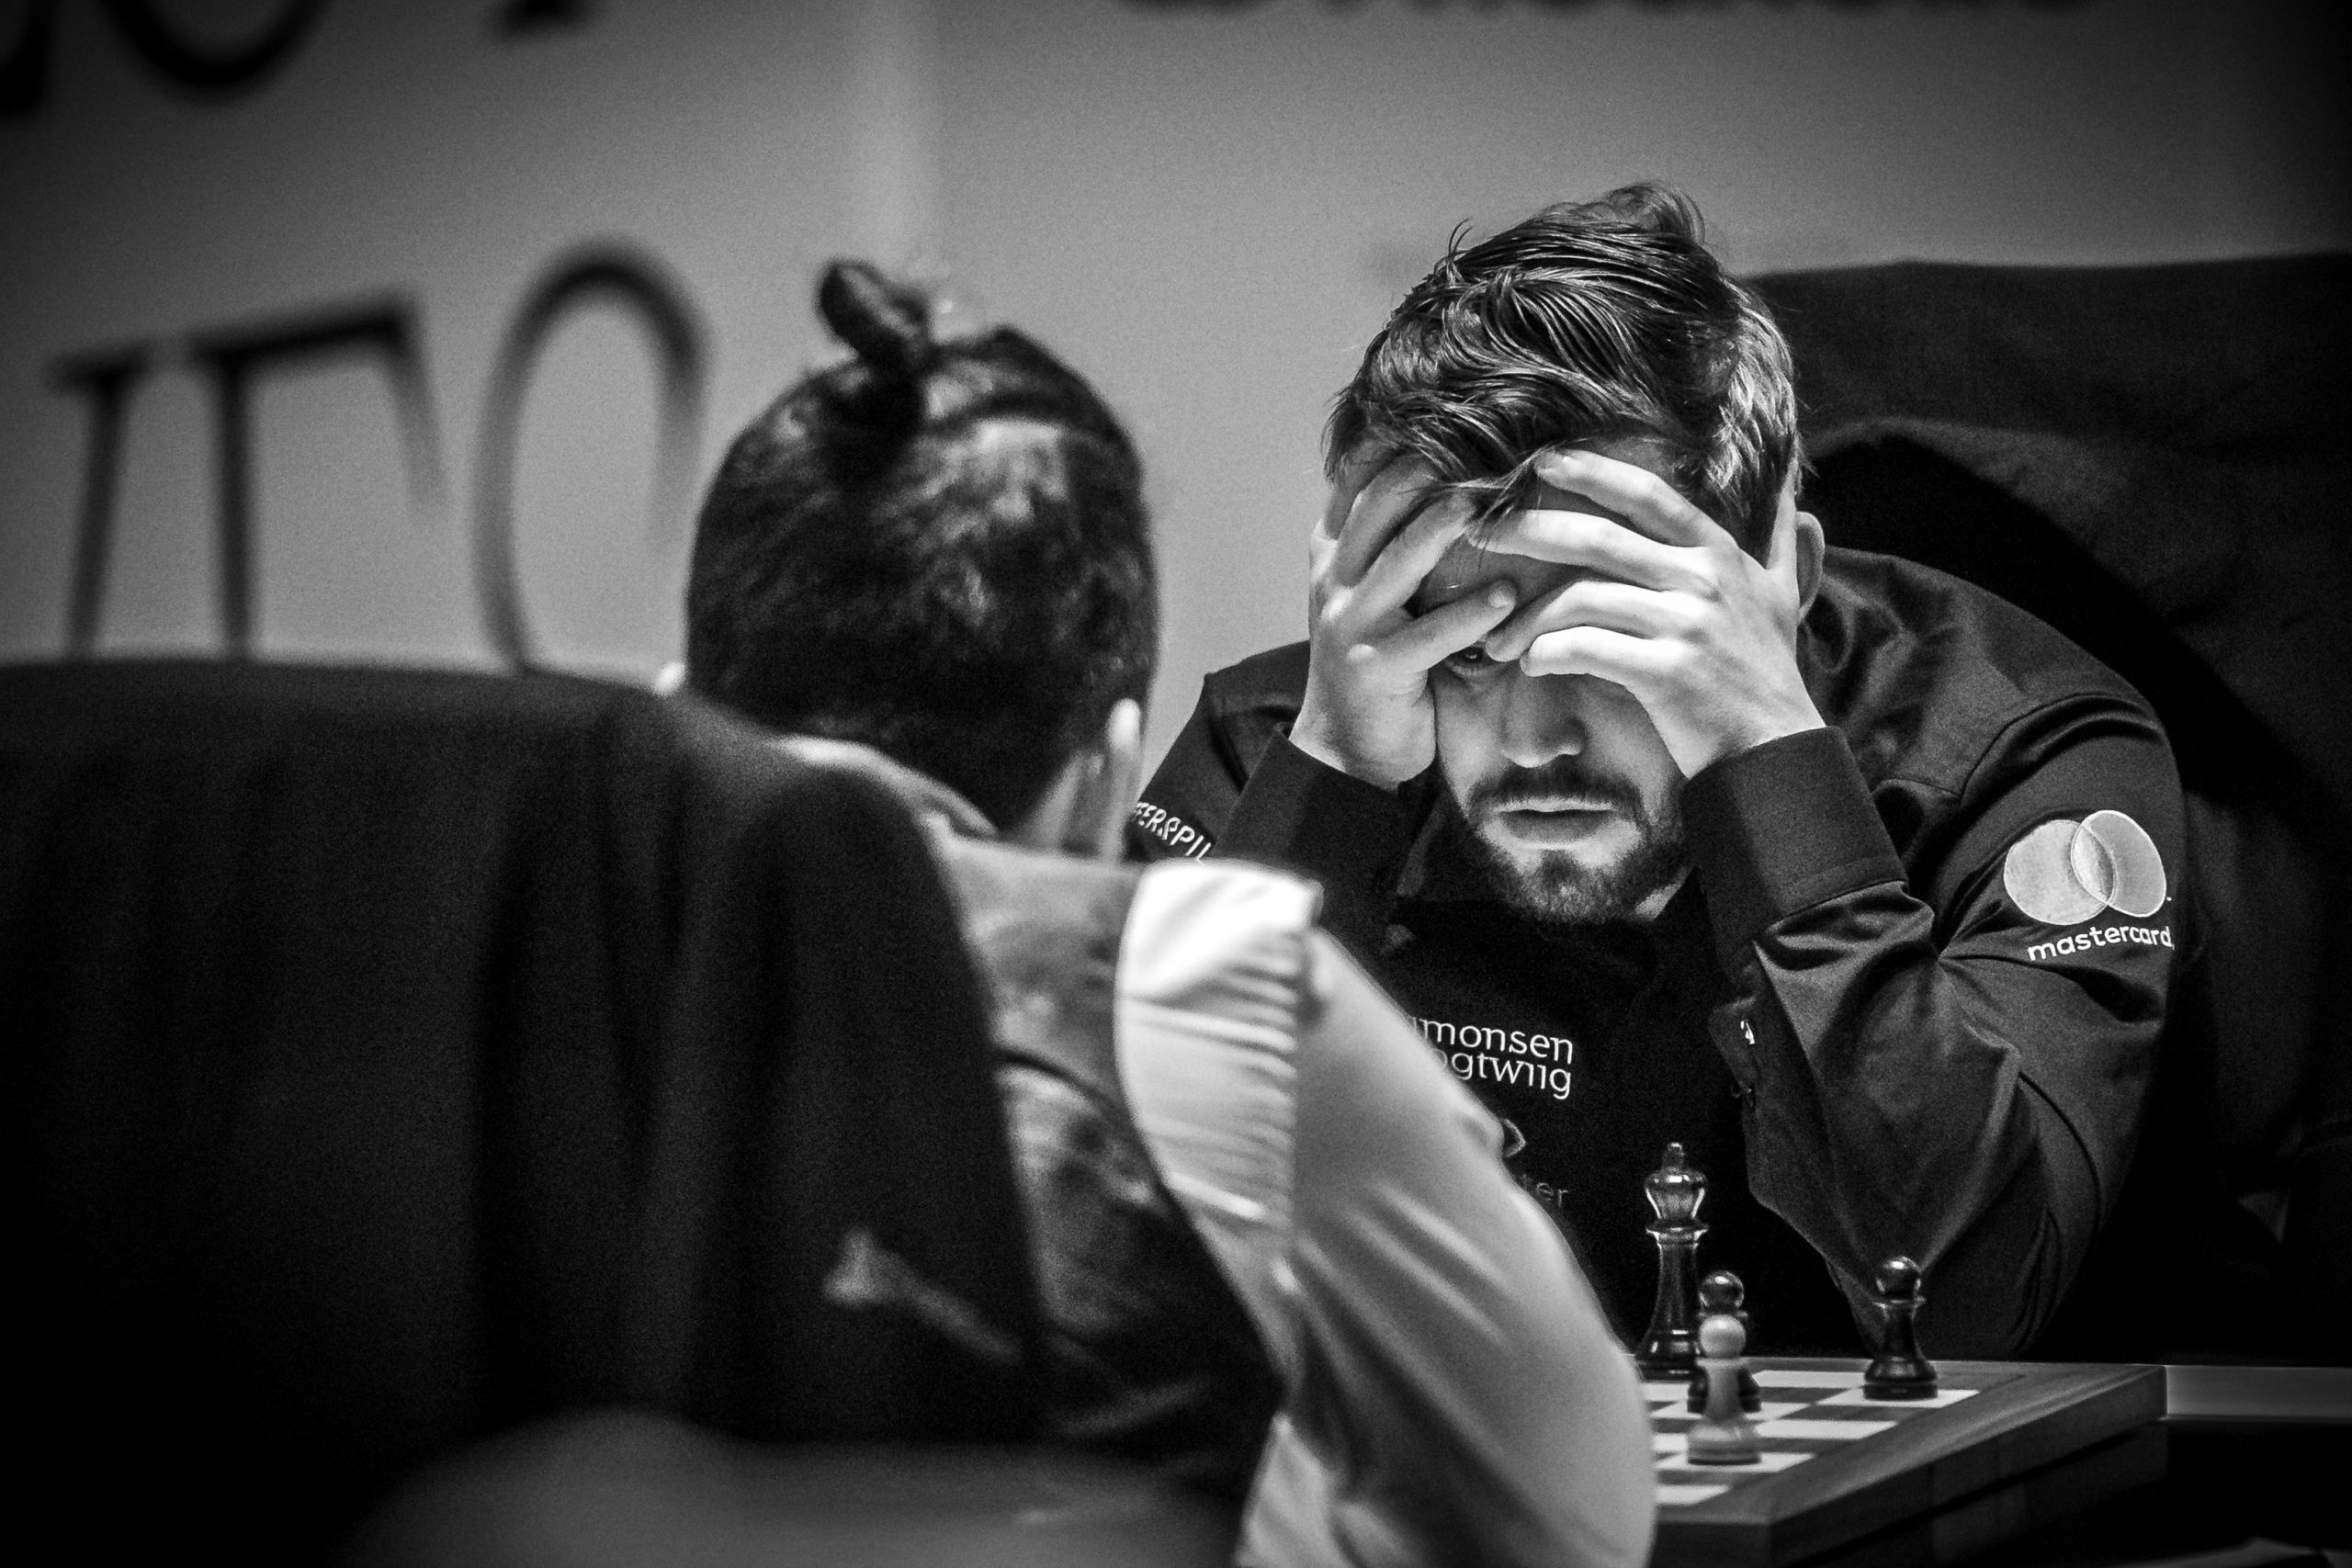 World Chess Championship: the first game ended in a draw after 45 moves